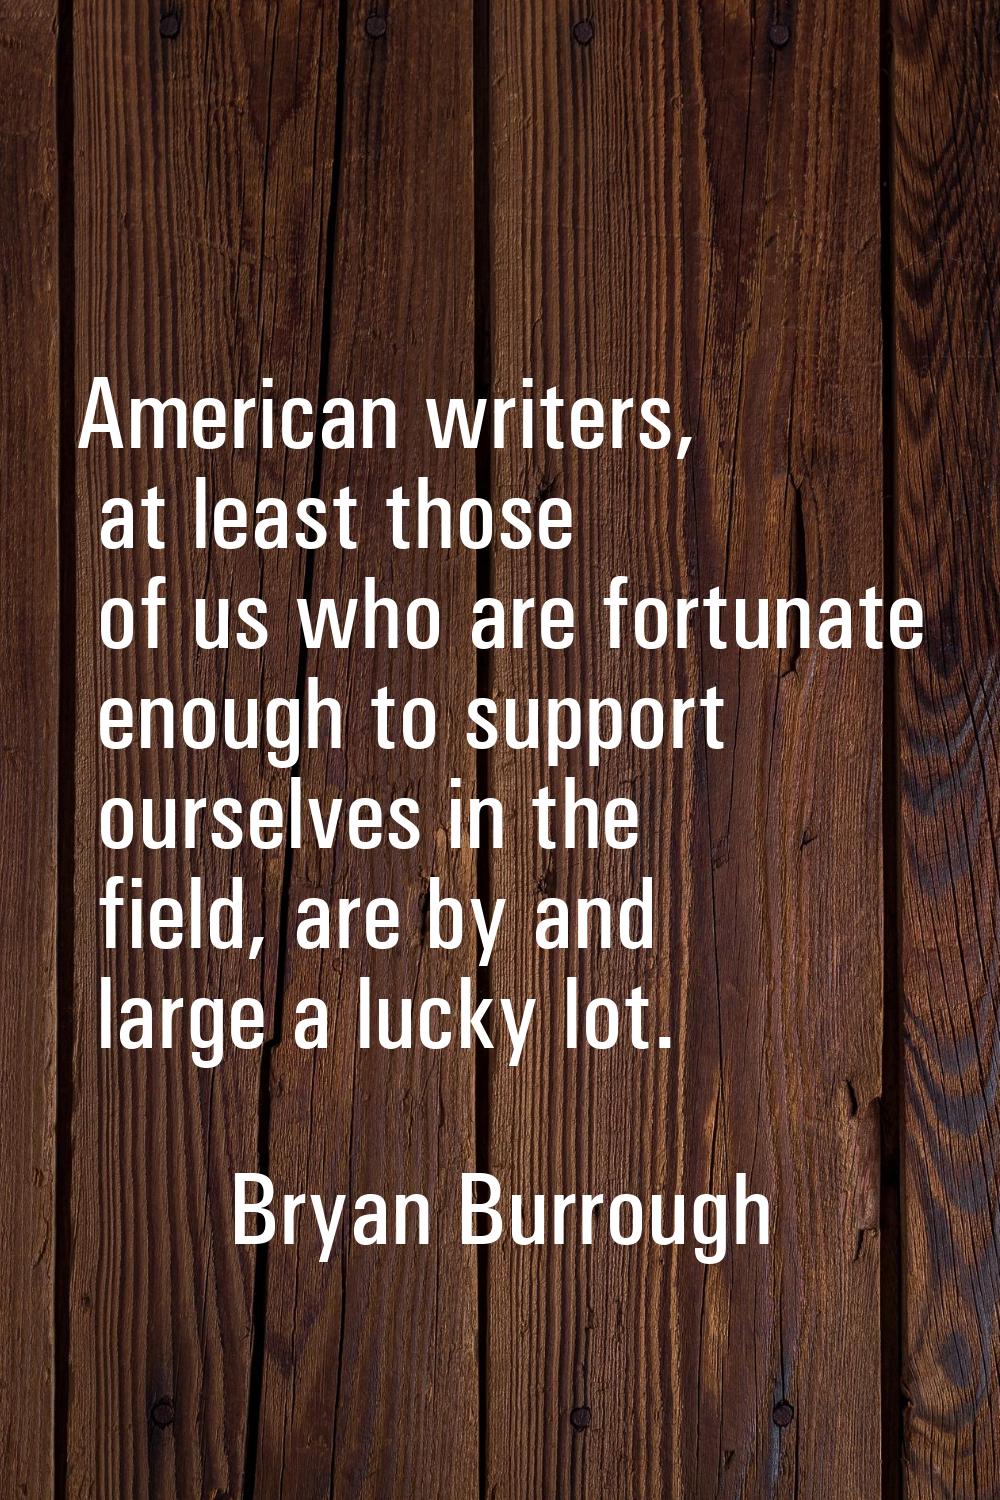 American writers, at least those of us who are fortunate enough to support ourselves in the field, 